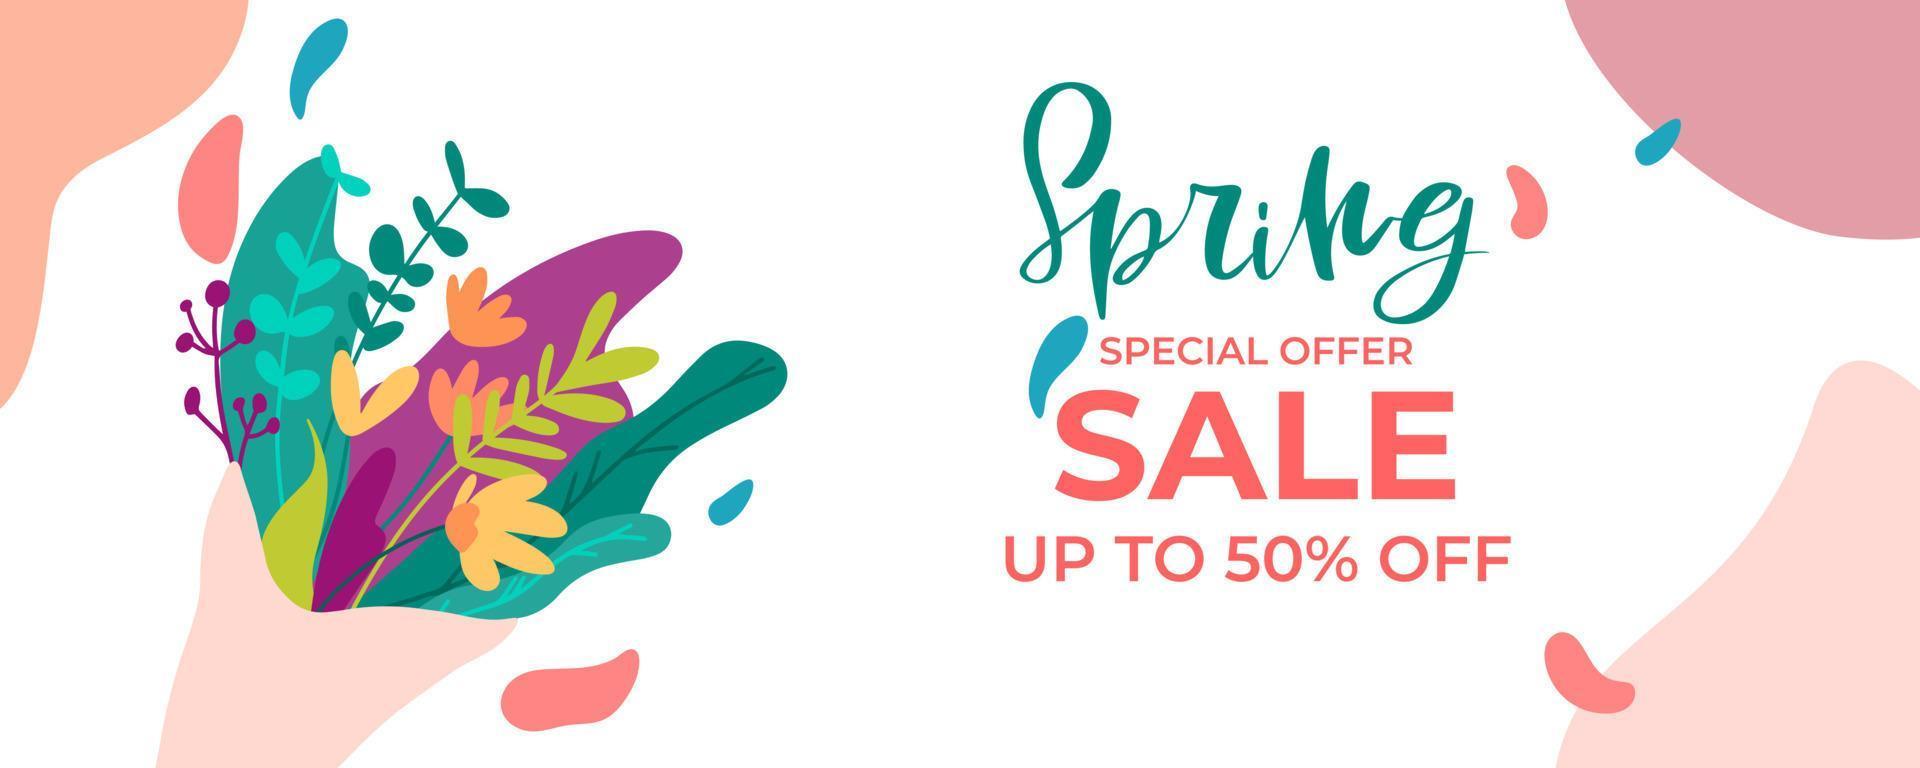 Spring Sale Banner Vector Design. Beautiful Spring Lettering colorful background with flowers. Perfect for banners, wallpaper, flyers, invitation, business cards, web, voucher discount.